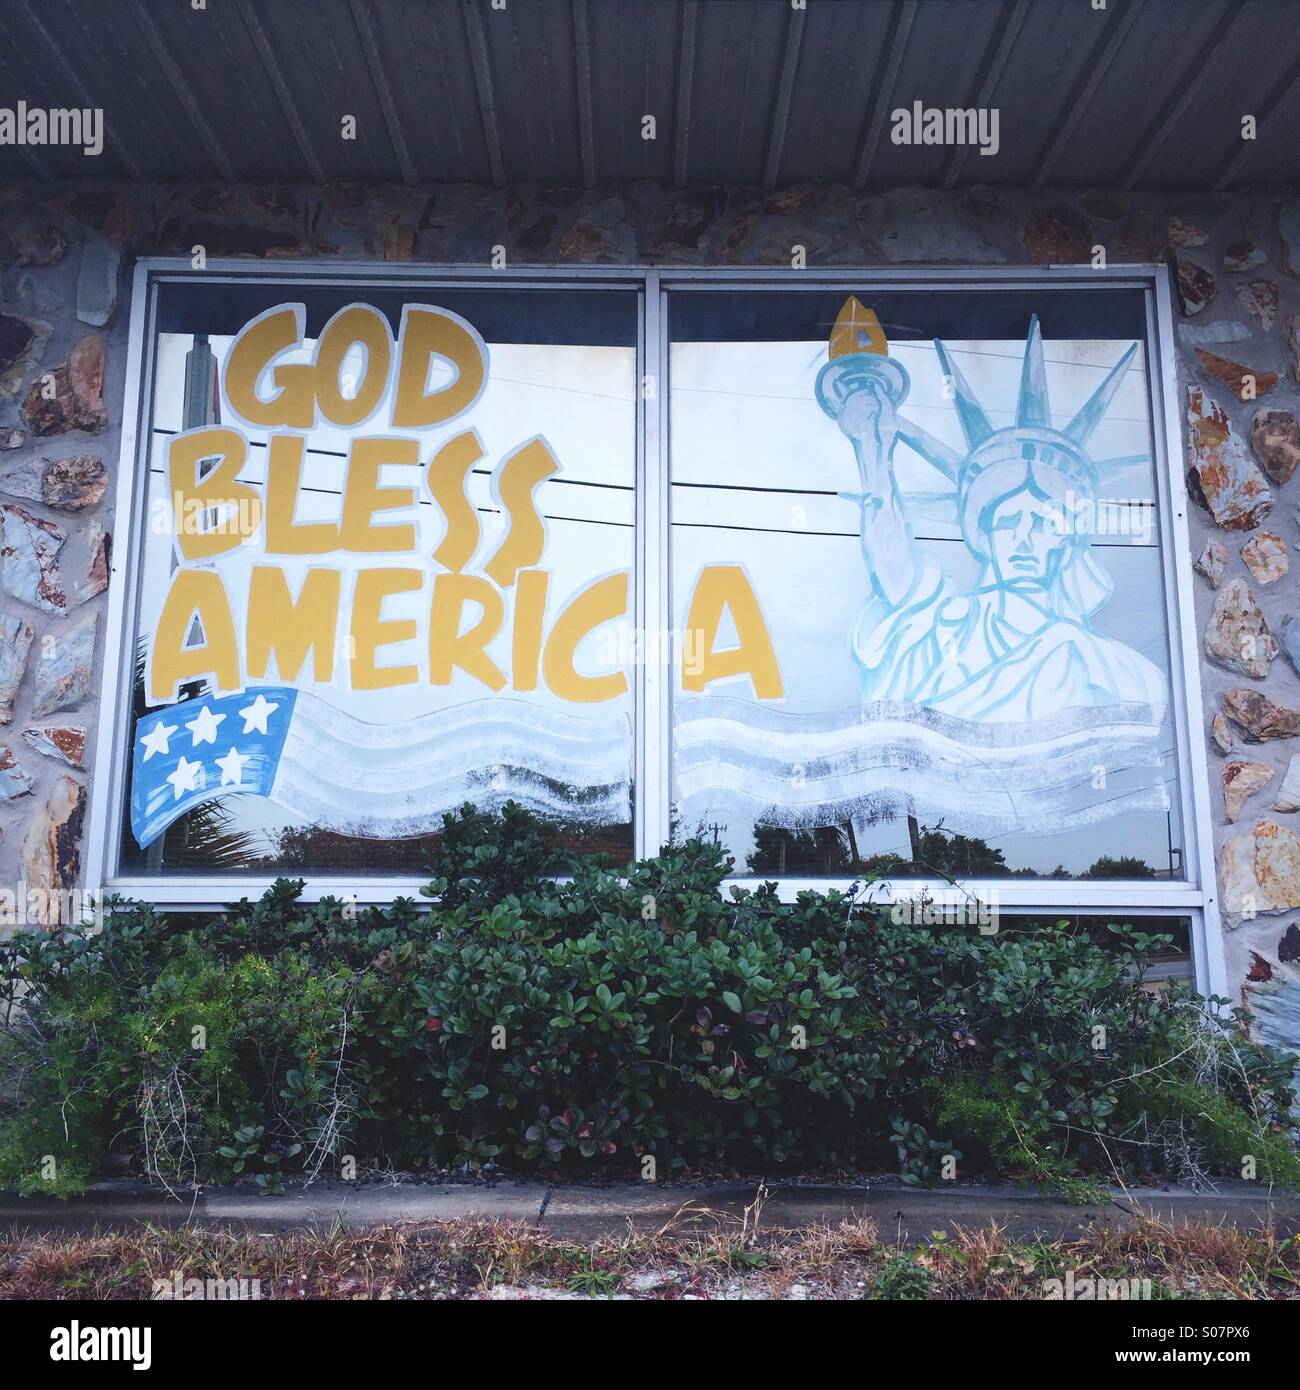 'God Bless America' reads the fading painted sign in a shop window, with an image of the Statue of Liberty. Panama City Beach, Florida, USA. Stock Photo